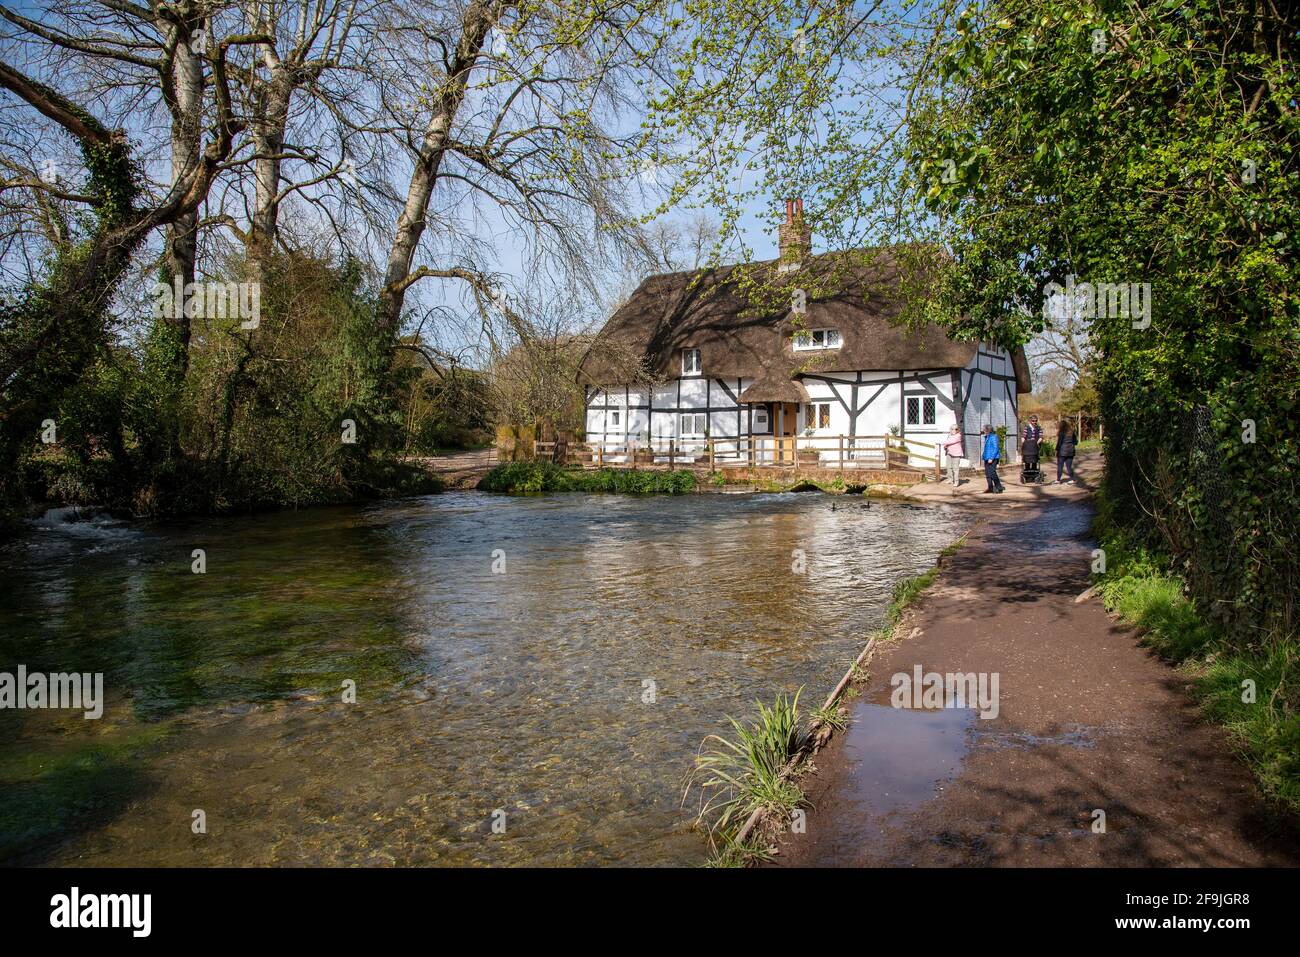 Alresford, Hampshire, England, UK. 2021,  The Fulling Mill a historic thatched building with the fast flowing River Arle passing below the ancient mil Stock Photo